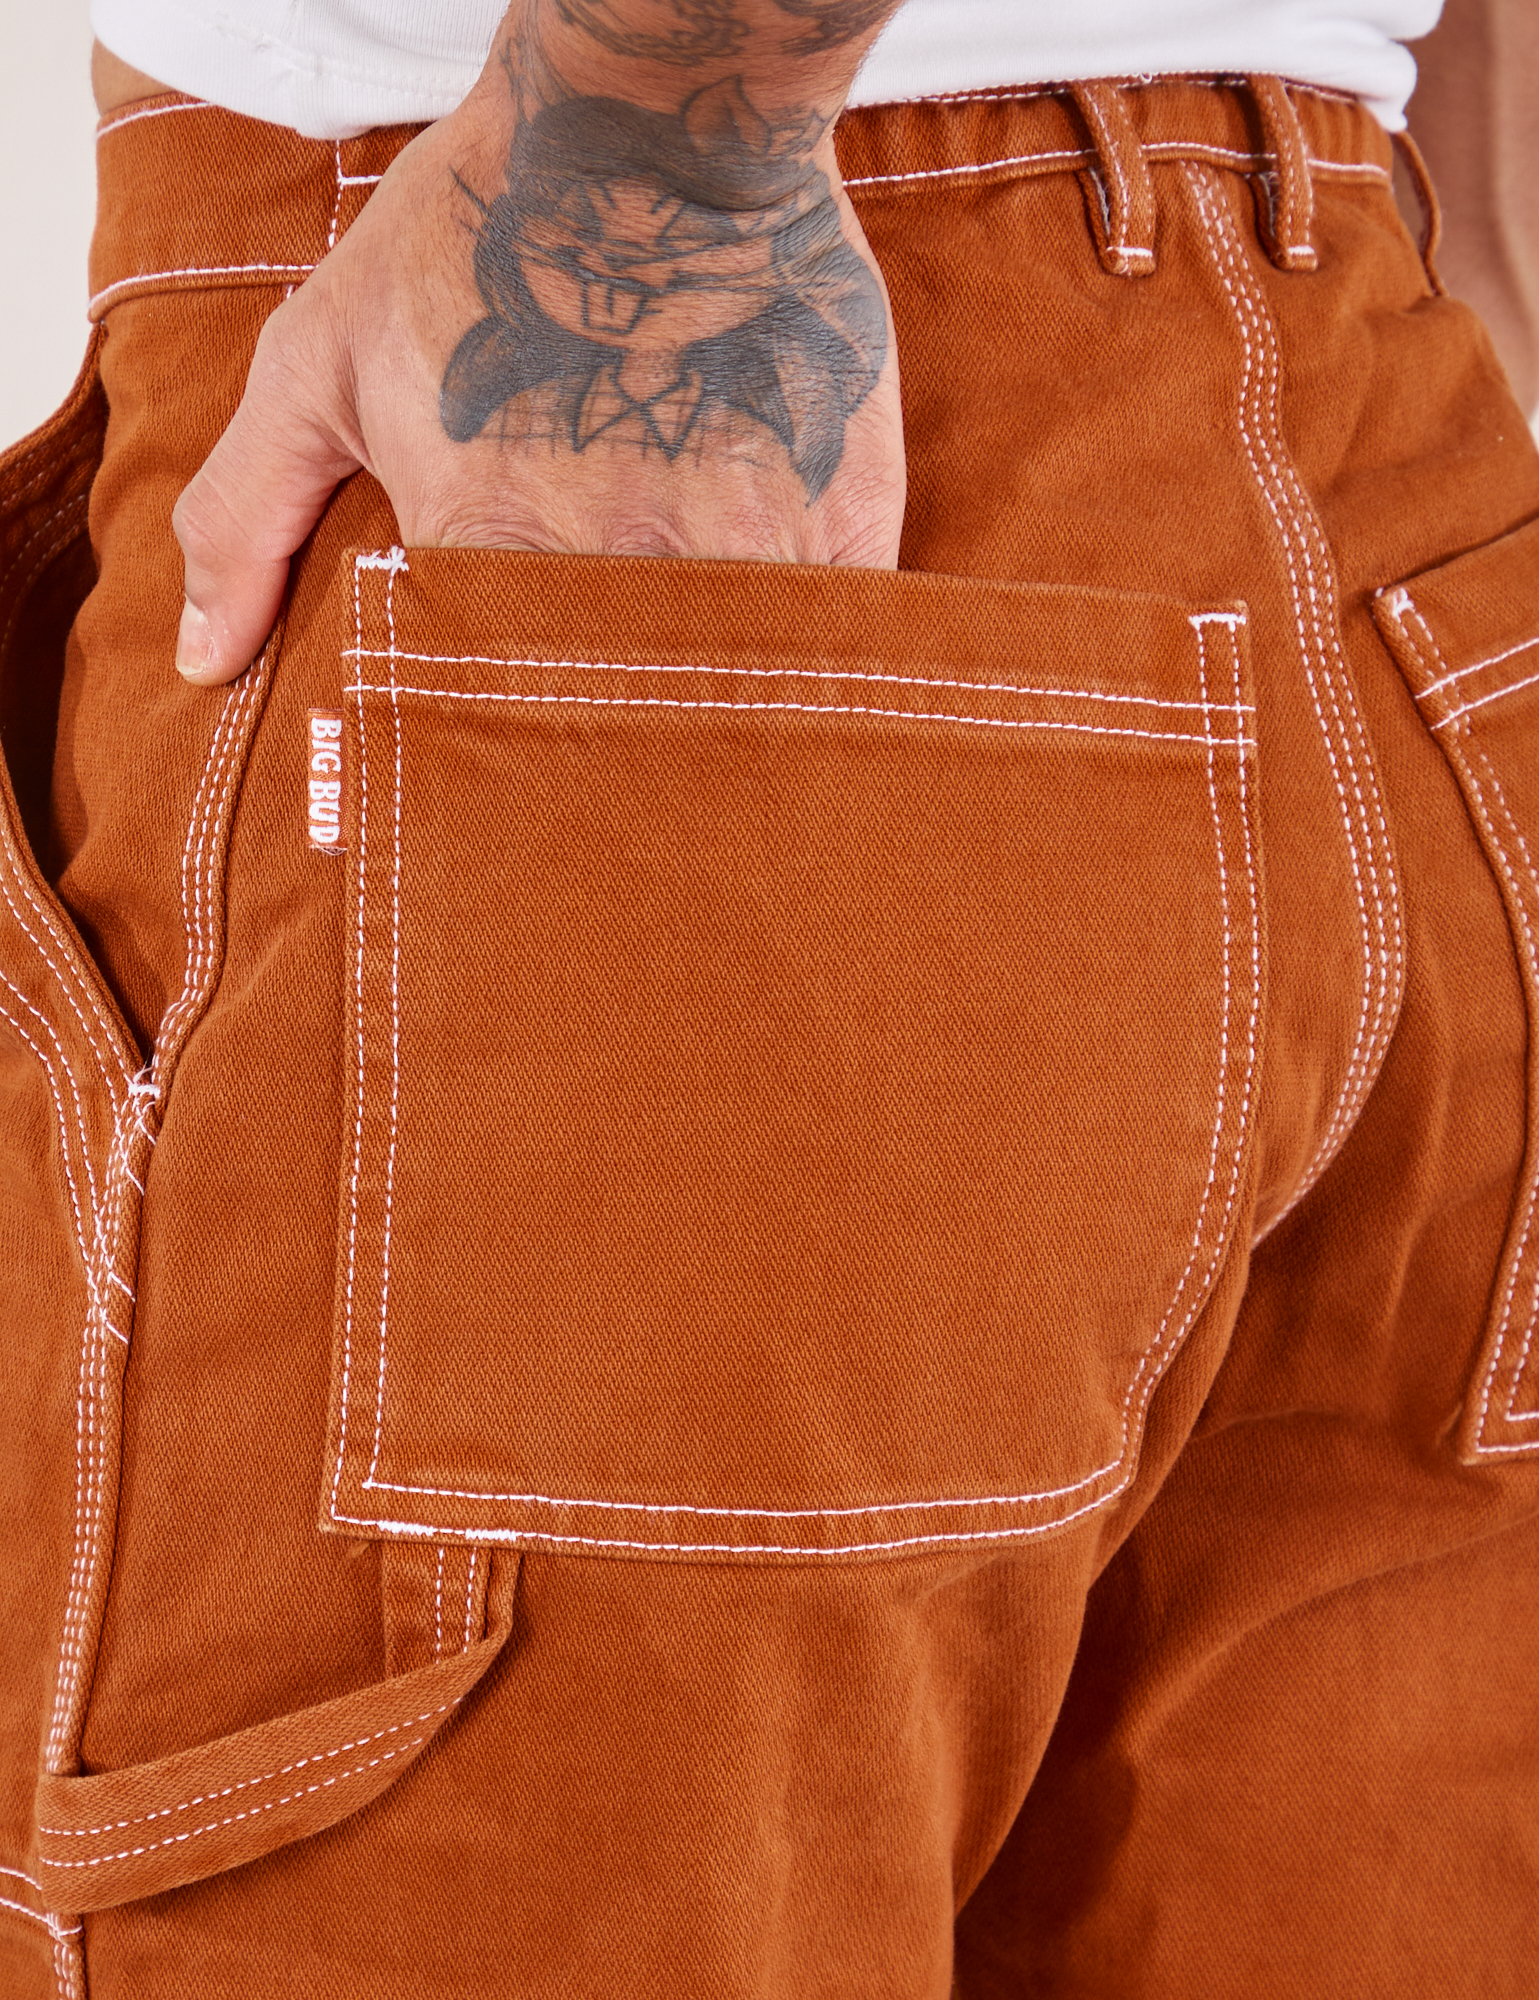 Carpenter Jeans in Burnt Terracotta back pocket close up. Jesse has their hand in the pocket.